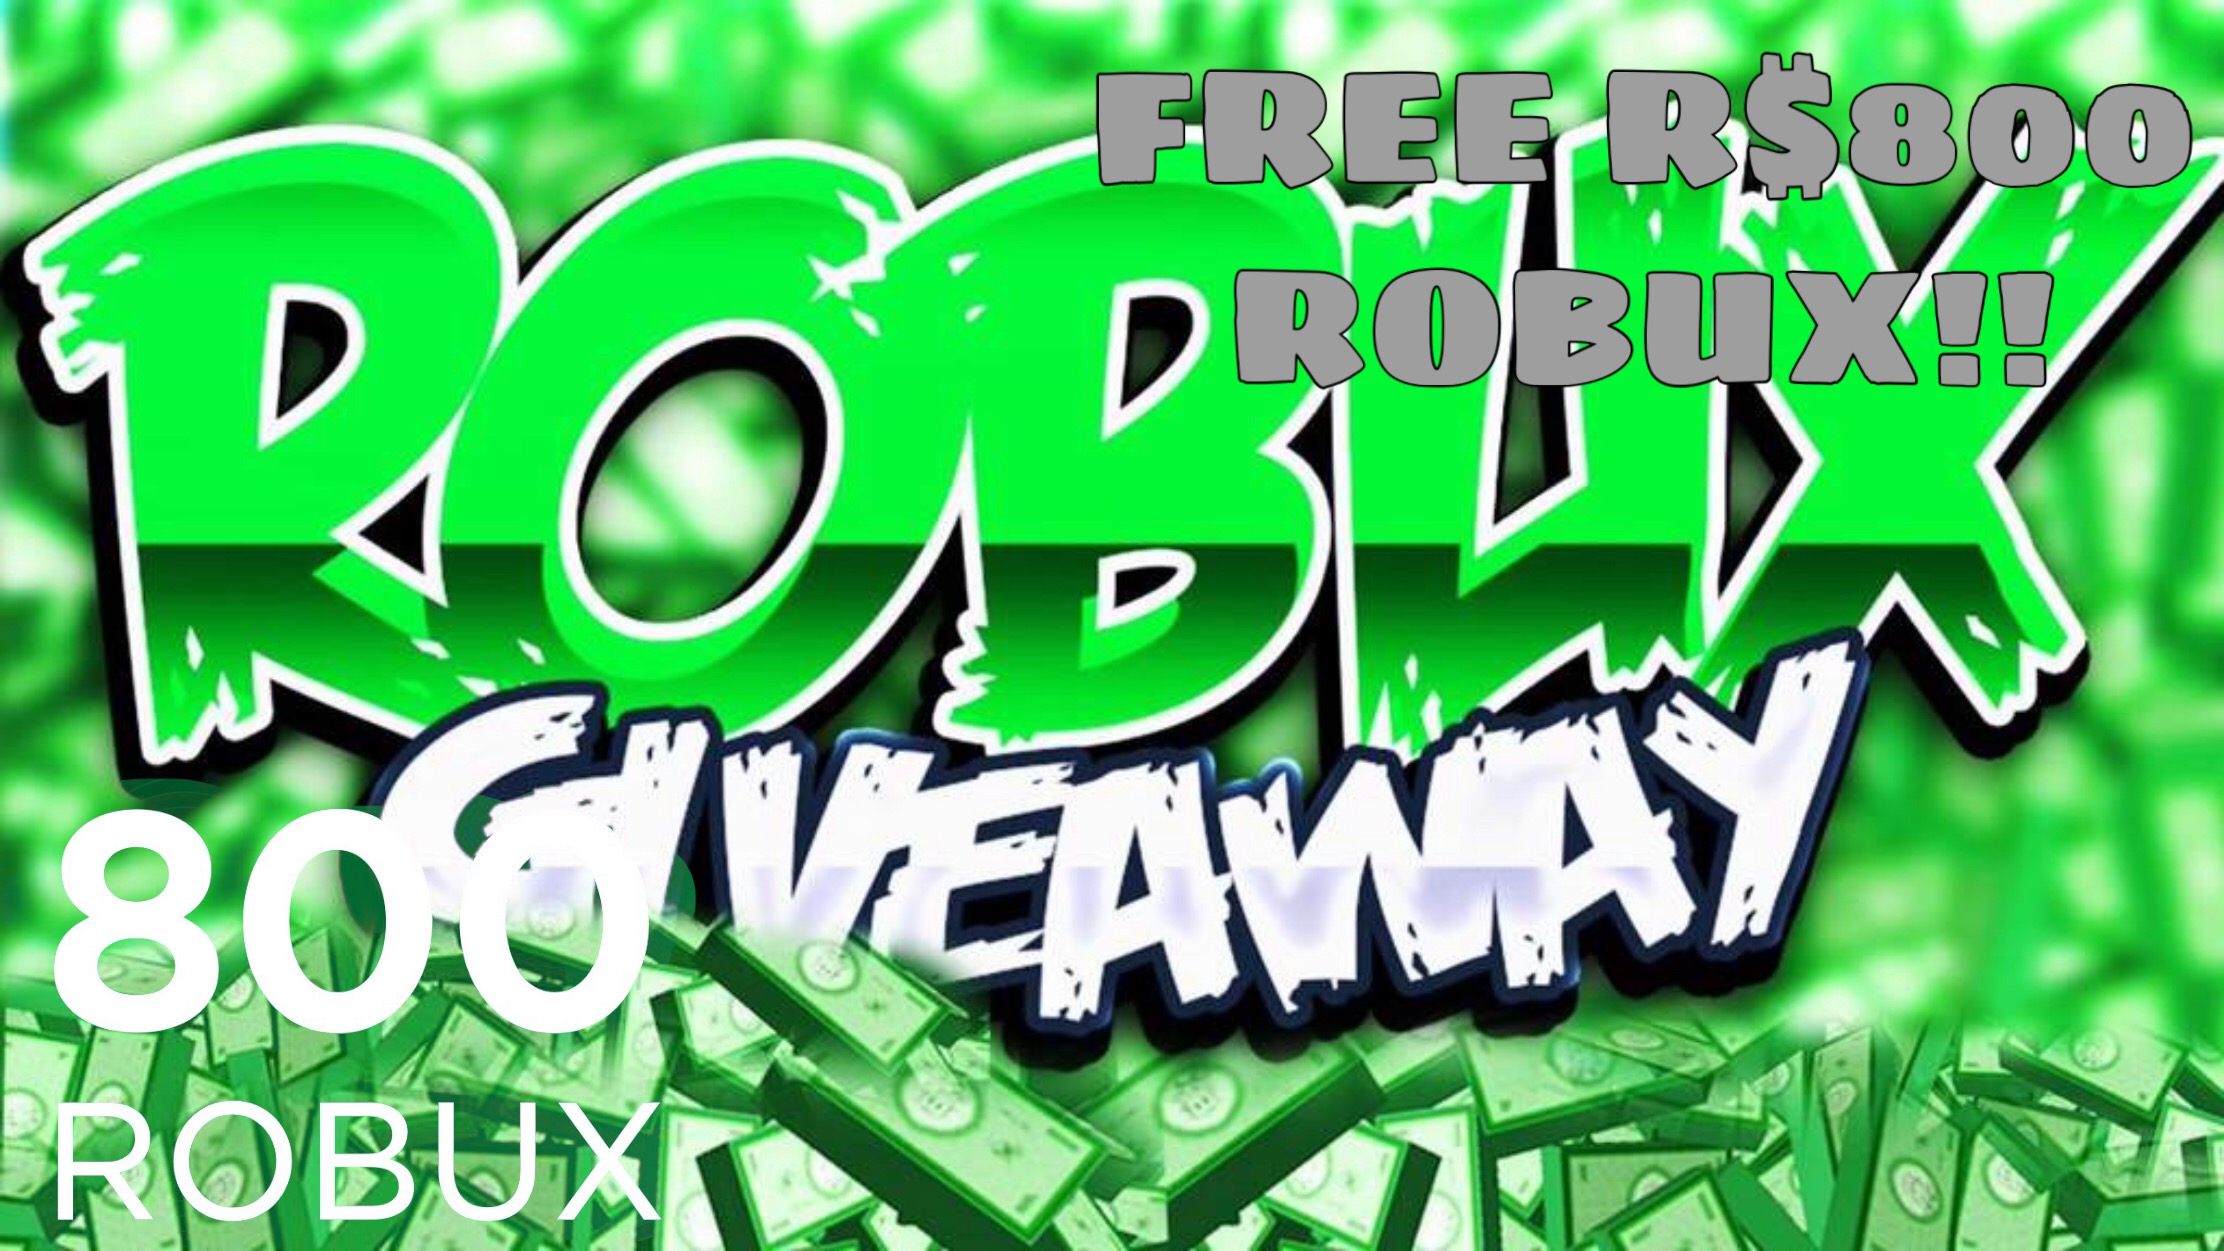 New Robux Giveaway About To Start - robux giveaway site